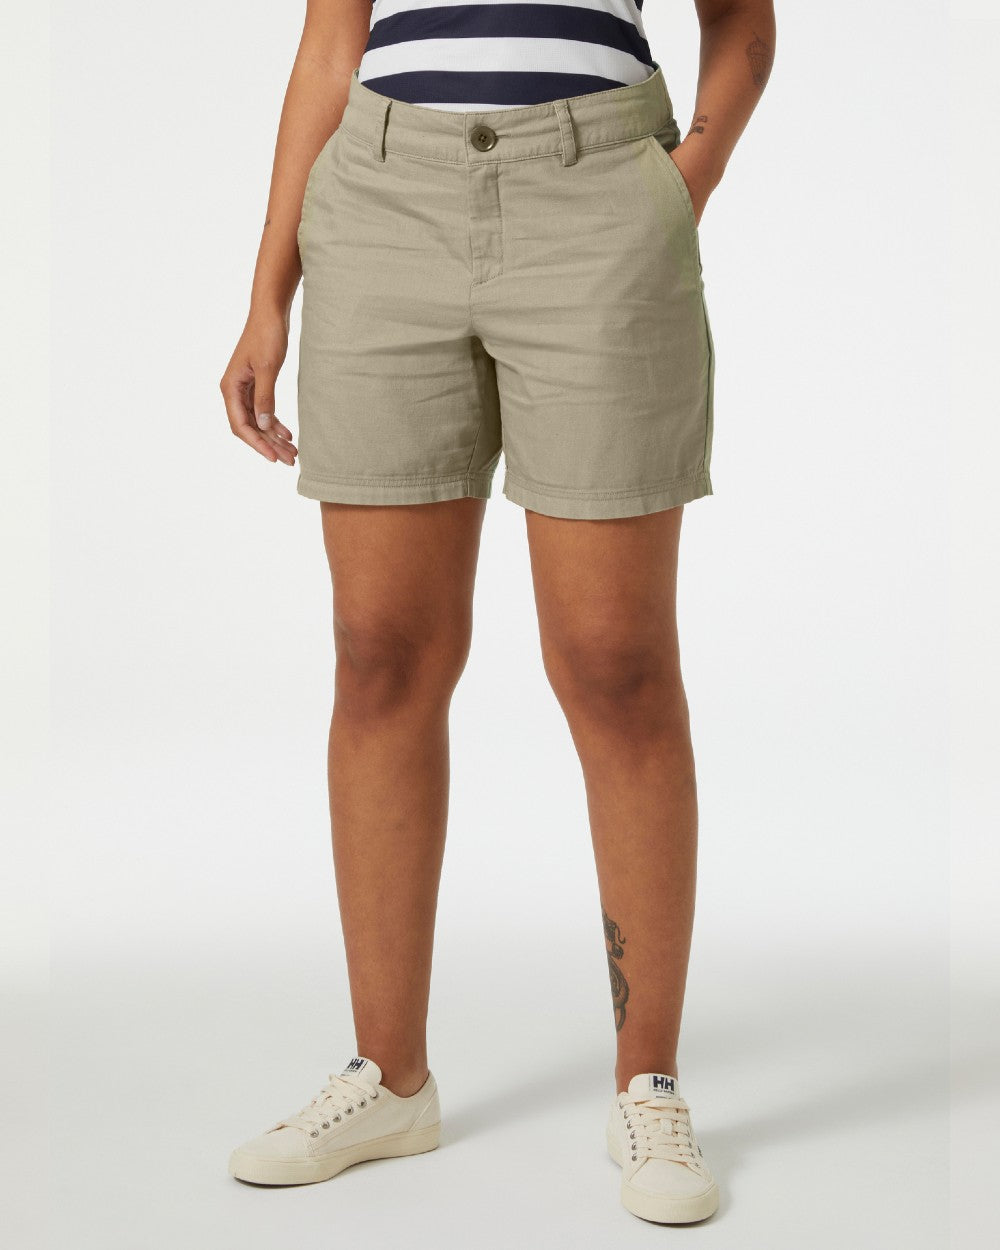 Pebble coloured Helly Hansen Womens Pier Shorts on grey background 